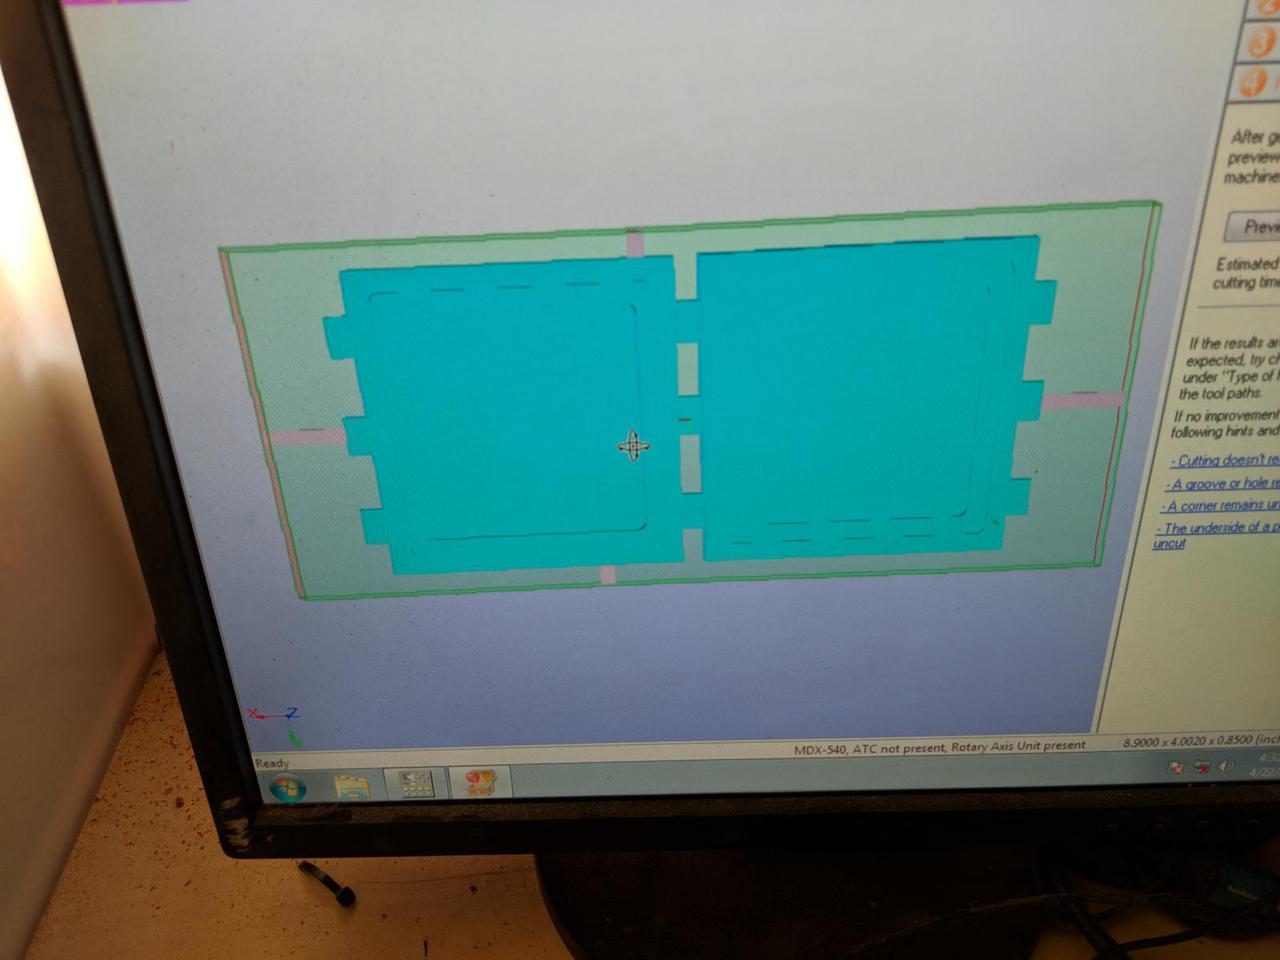 computer monitor showing the design with supports extending out to make the milling region larger.